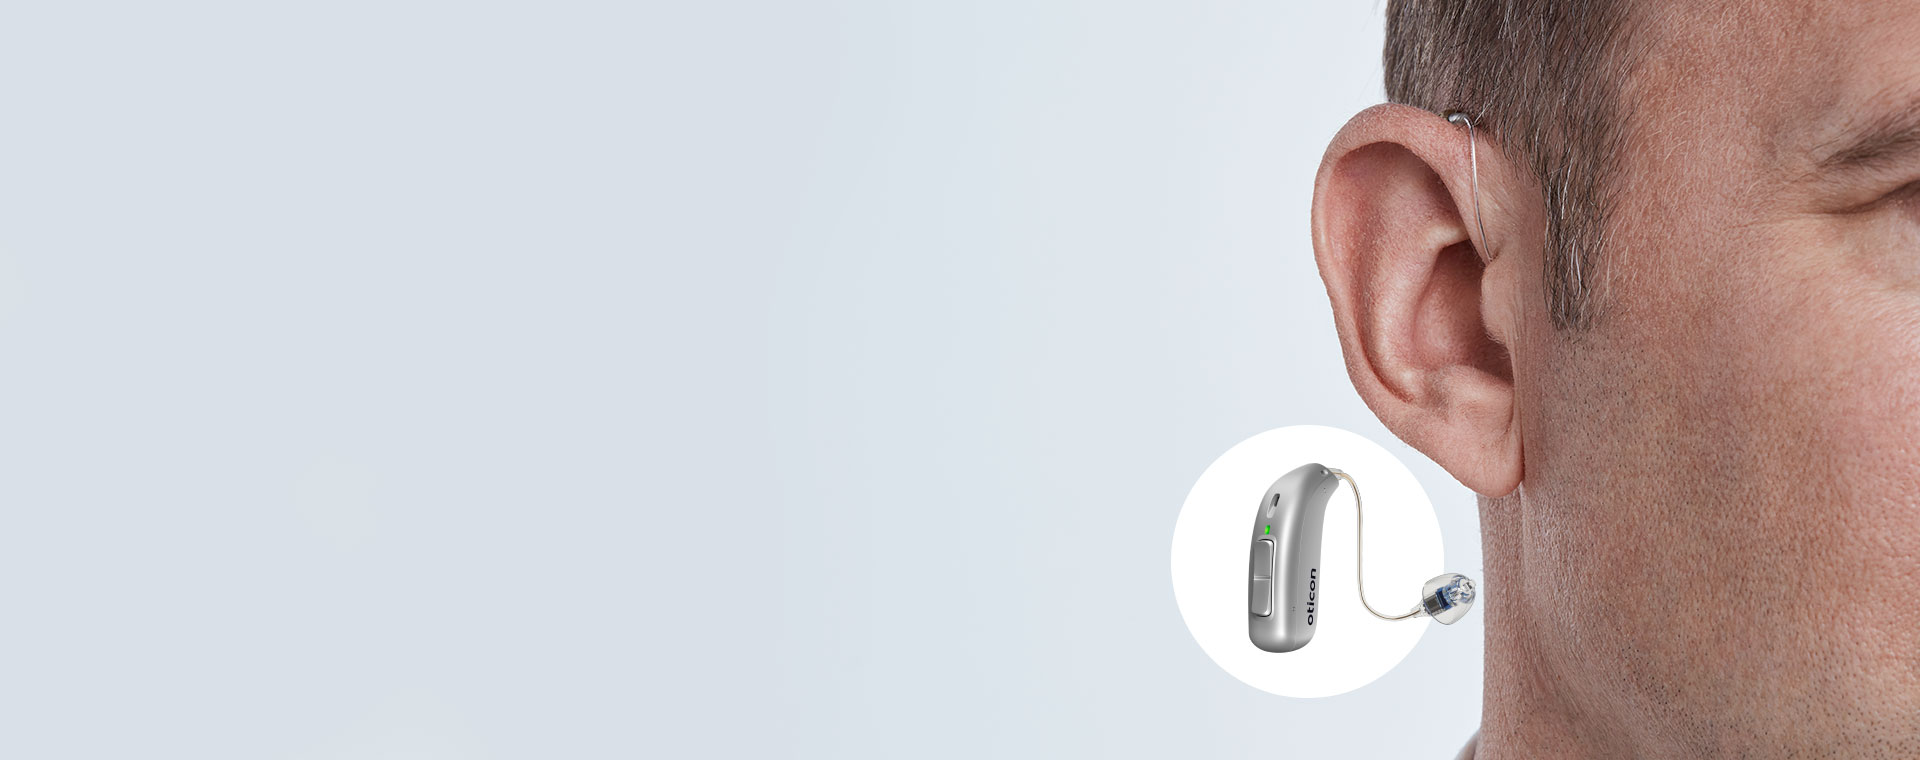 Image shows a hearing aid placed behind the ear